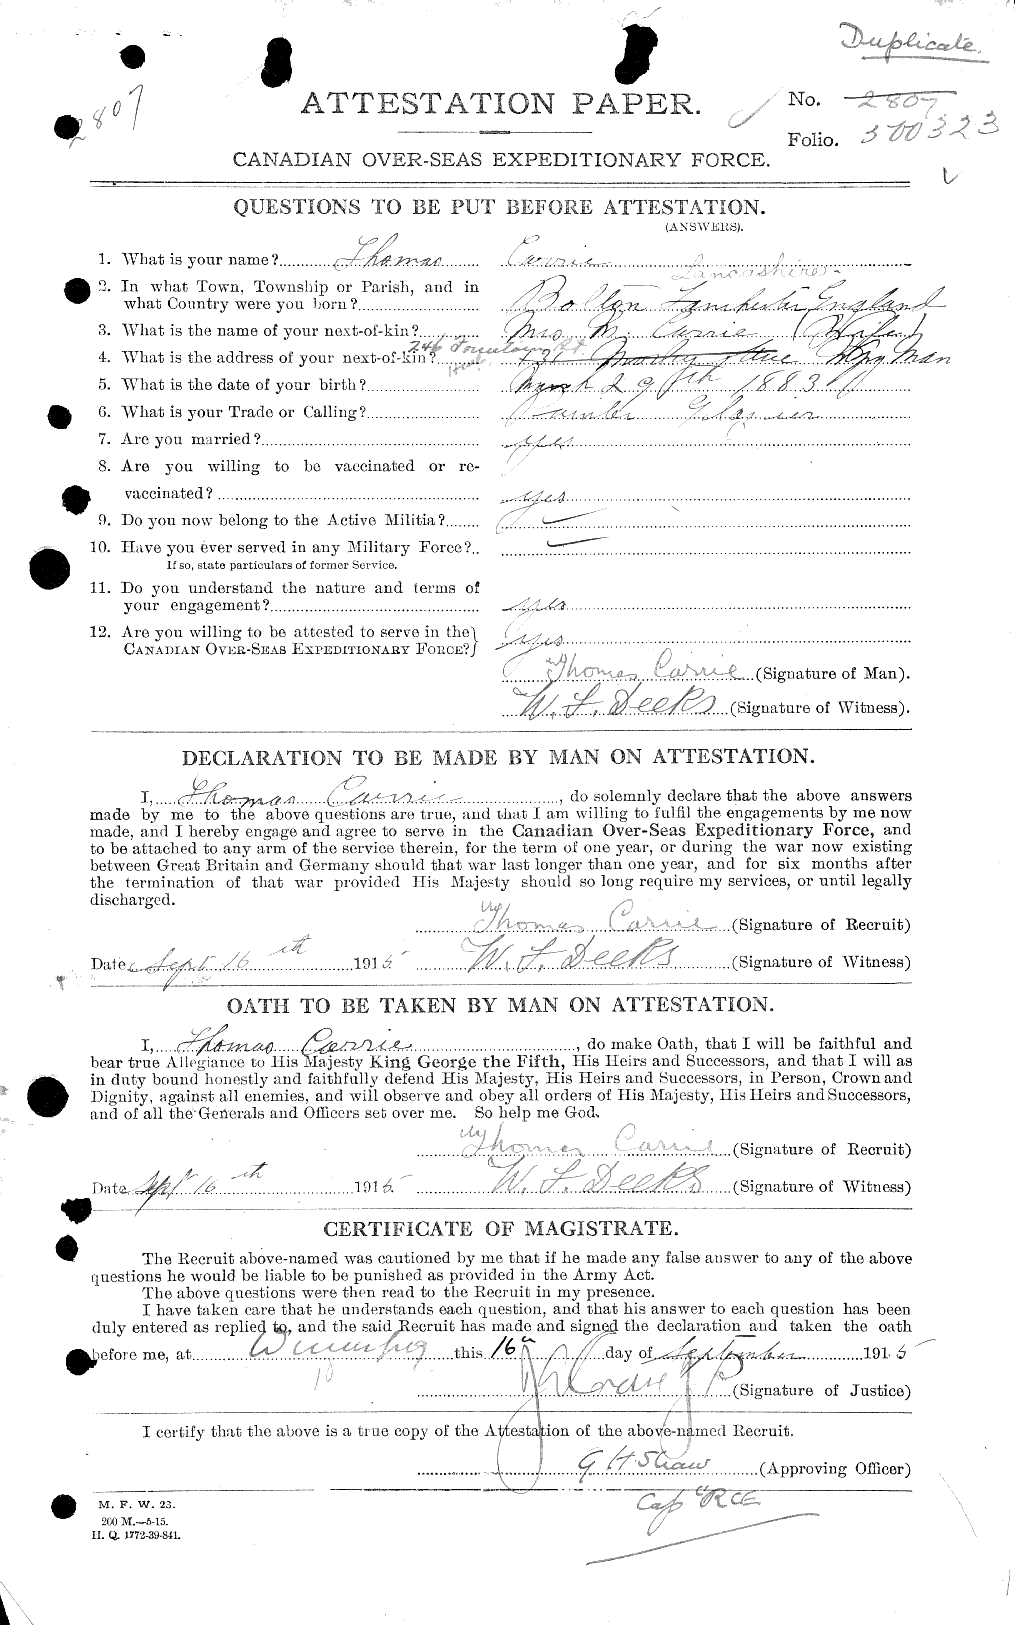 Personnel Records of the First World War - CEF 011318a